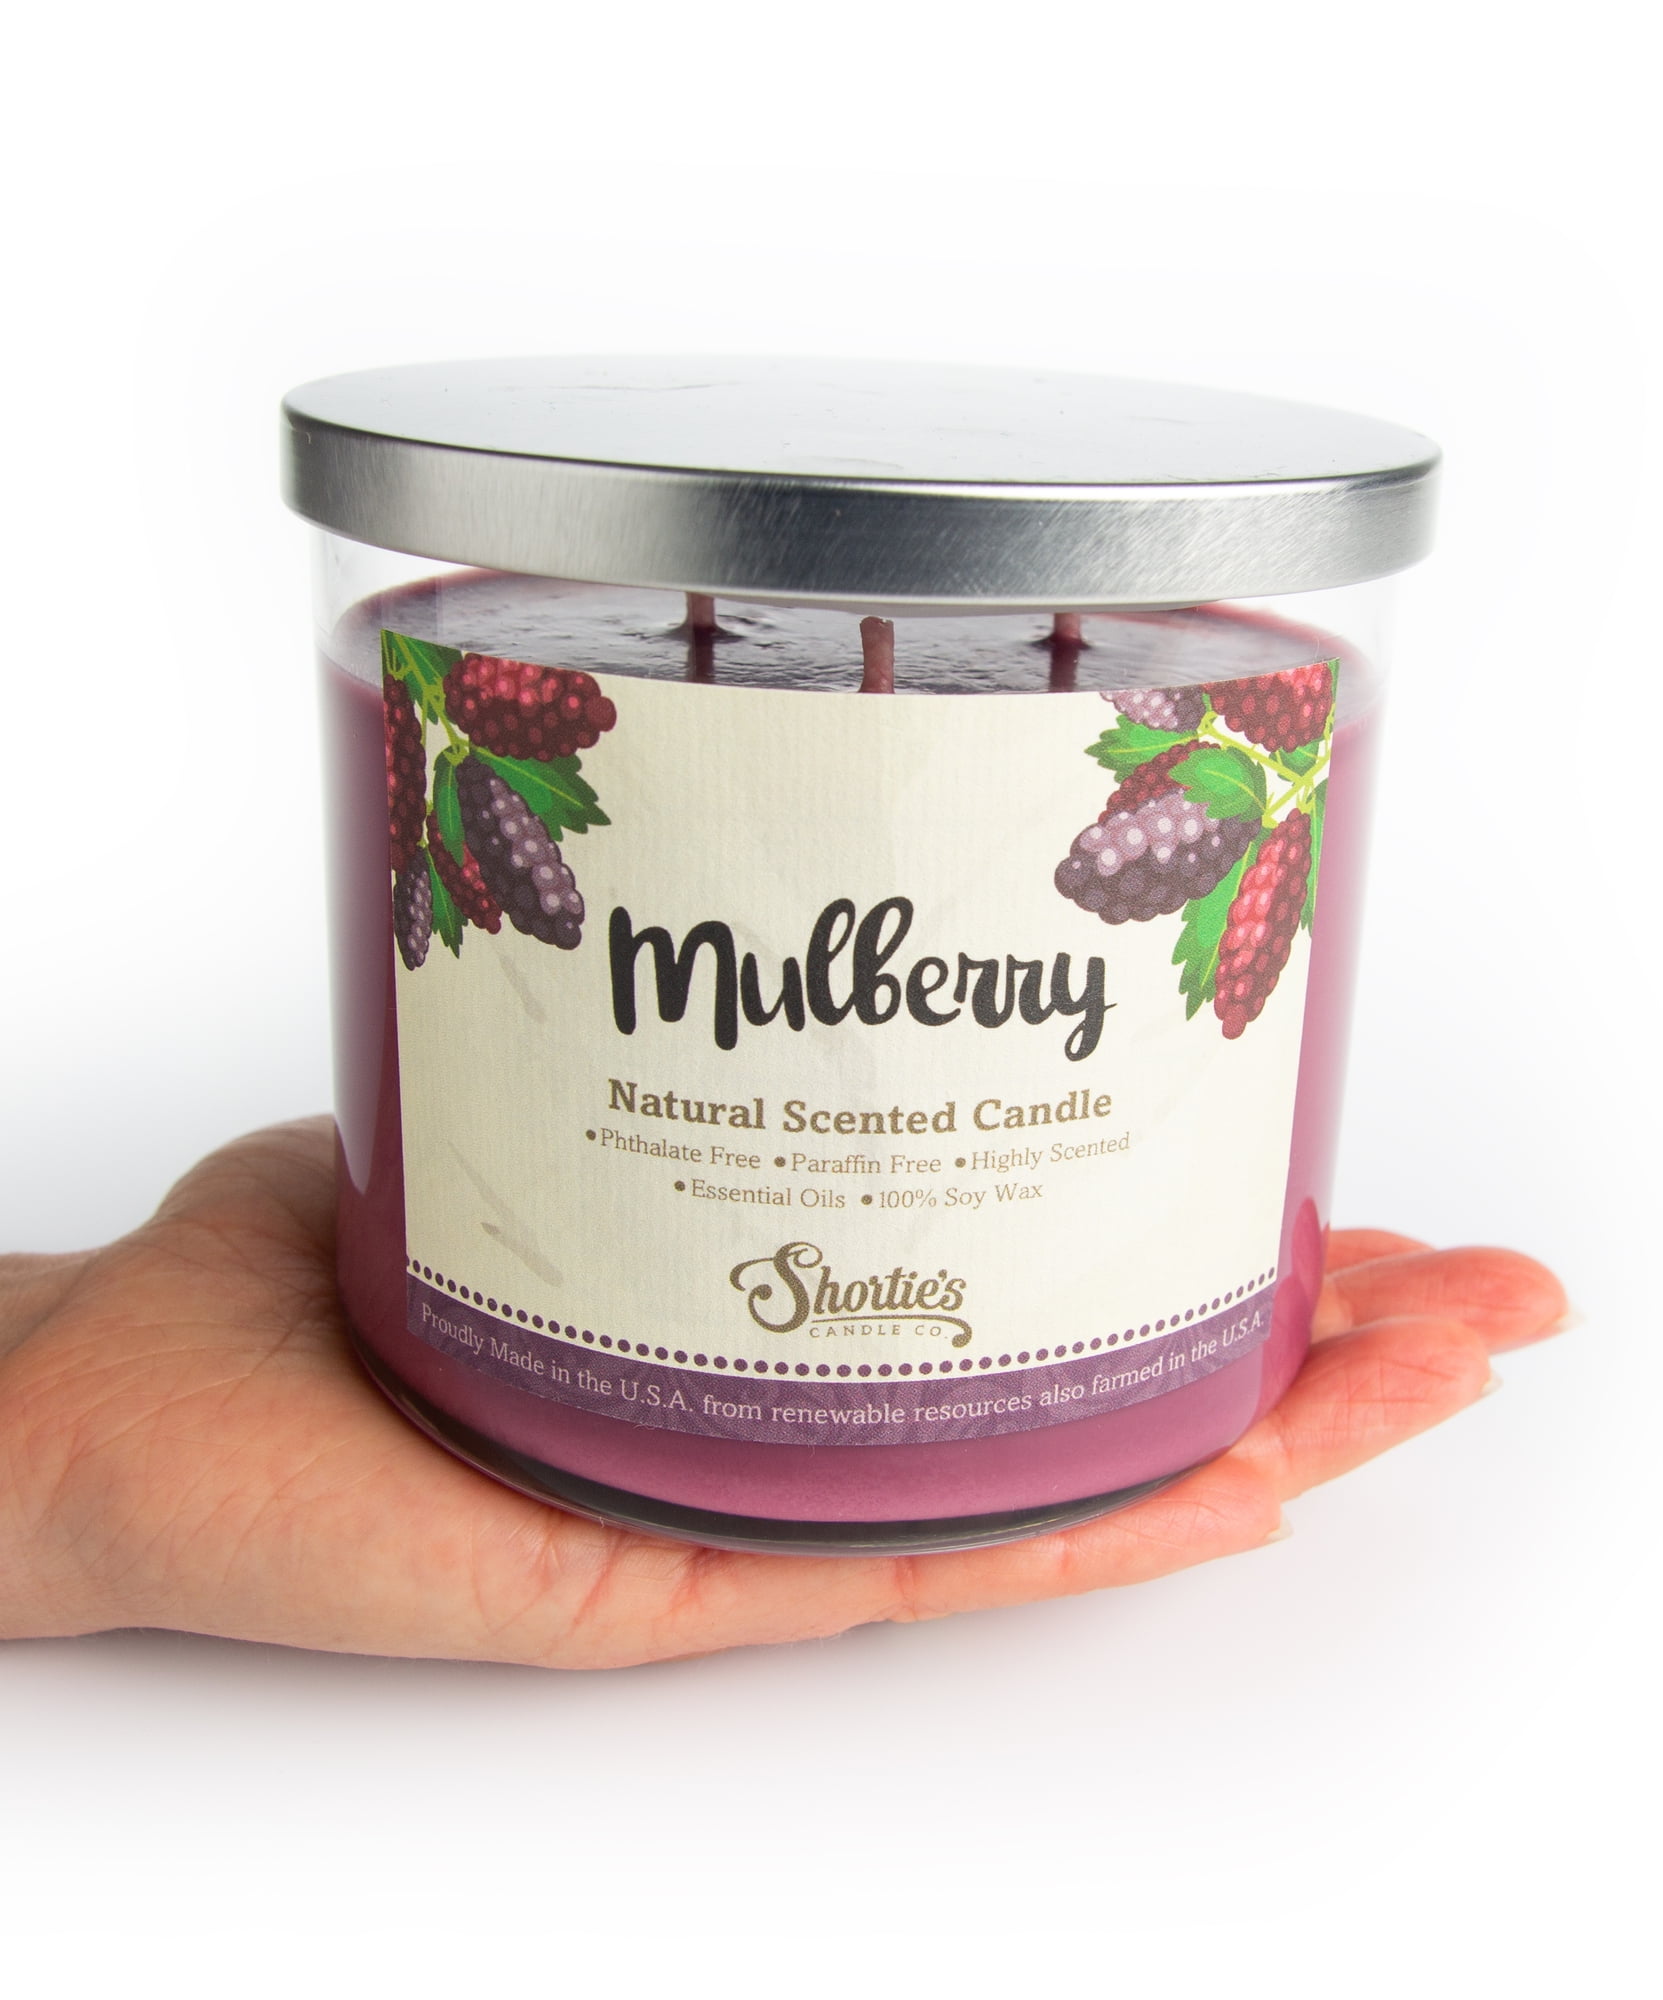 Blueberry Hen, Paraffin-Free, Soy-Based Candle